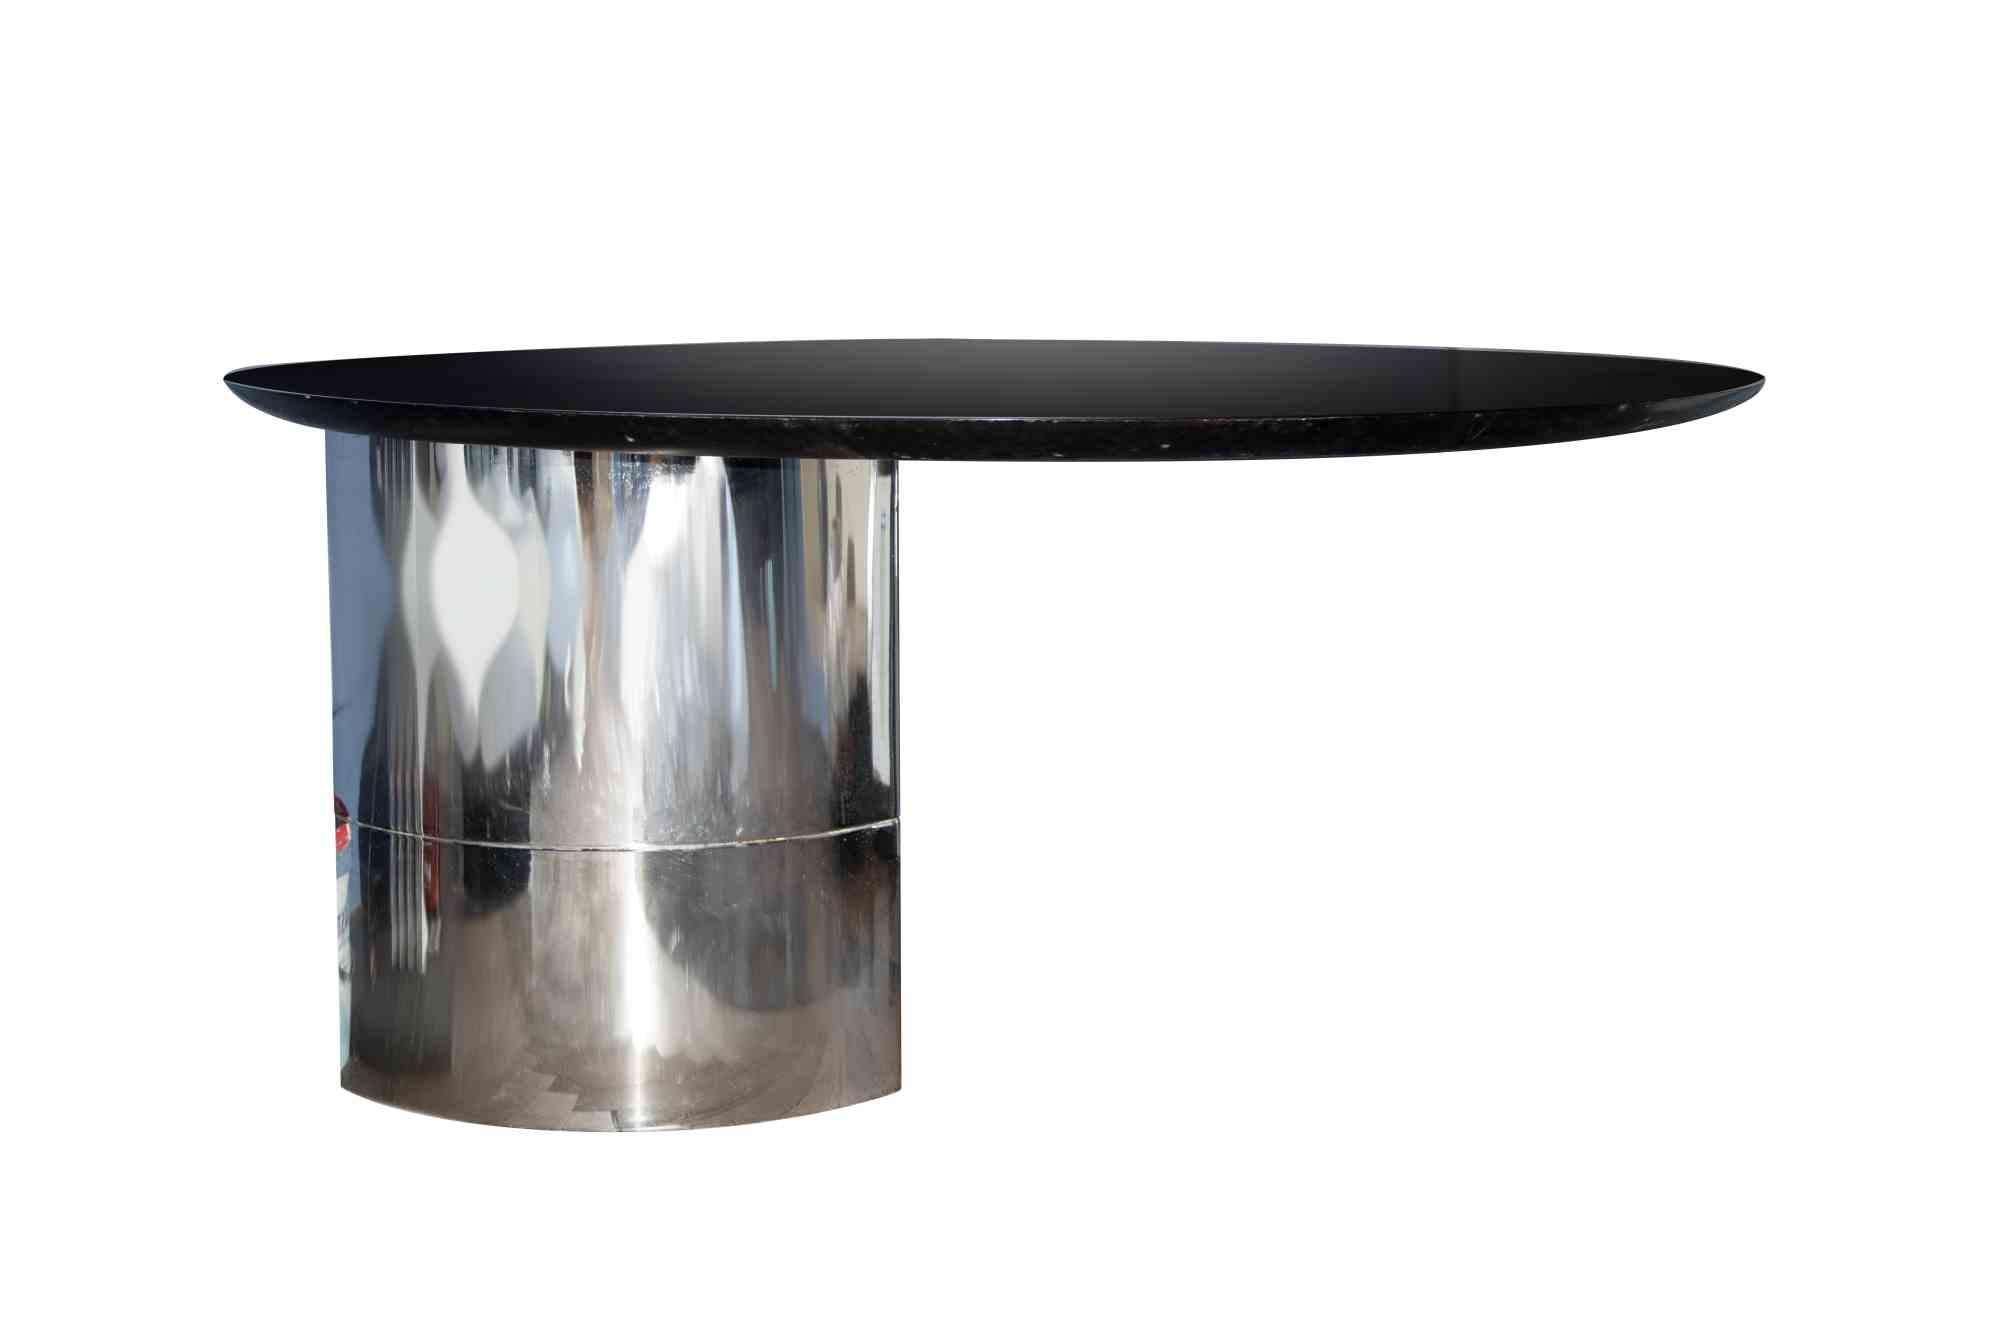 Lunario table is an original contemporary Artwork realized in Italy in the 1970s by Cini Boeri (19 June 1924 – Milan, 9 September 2020).

Created for Knoll.

Made in Italy.

Total dimensions: 72 cm x 110 cm x 150 cm. The weight is